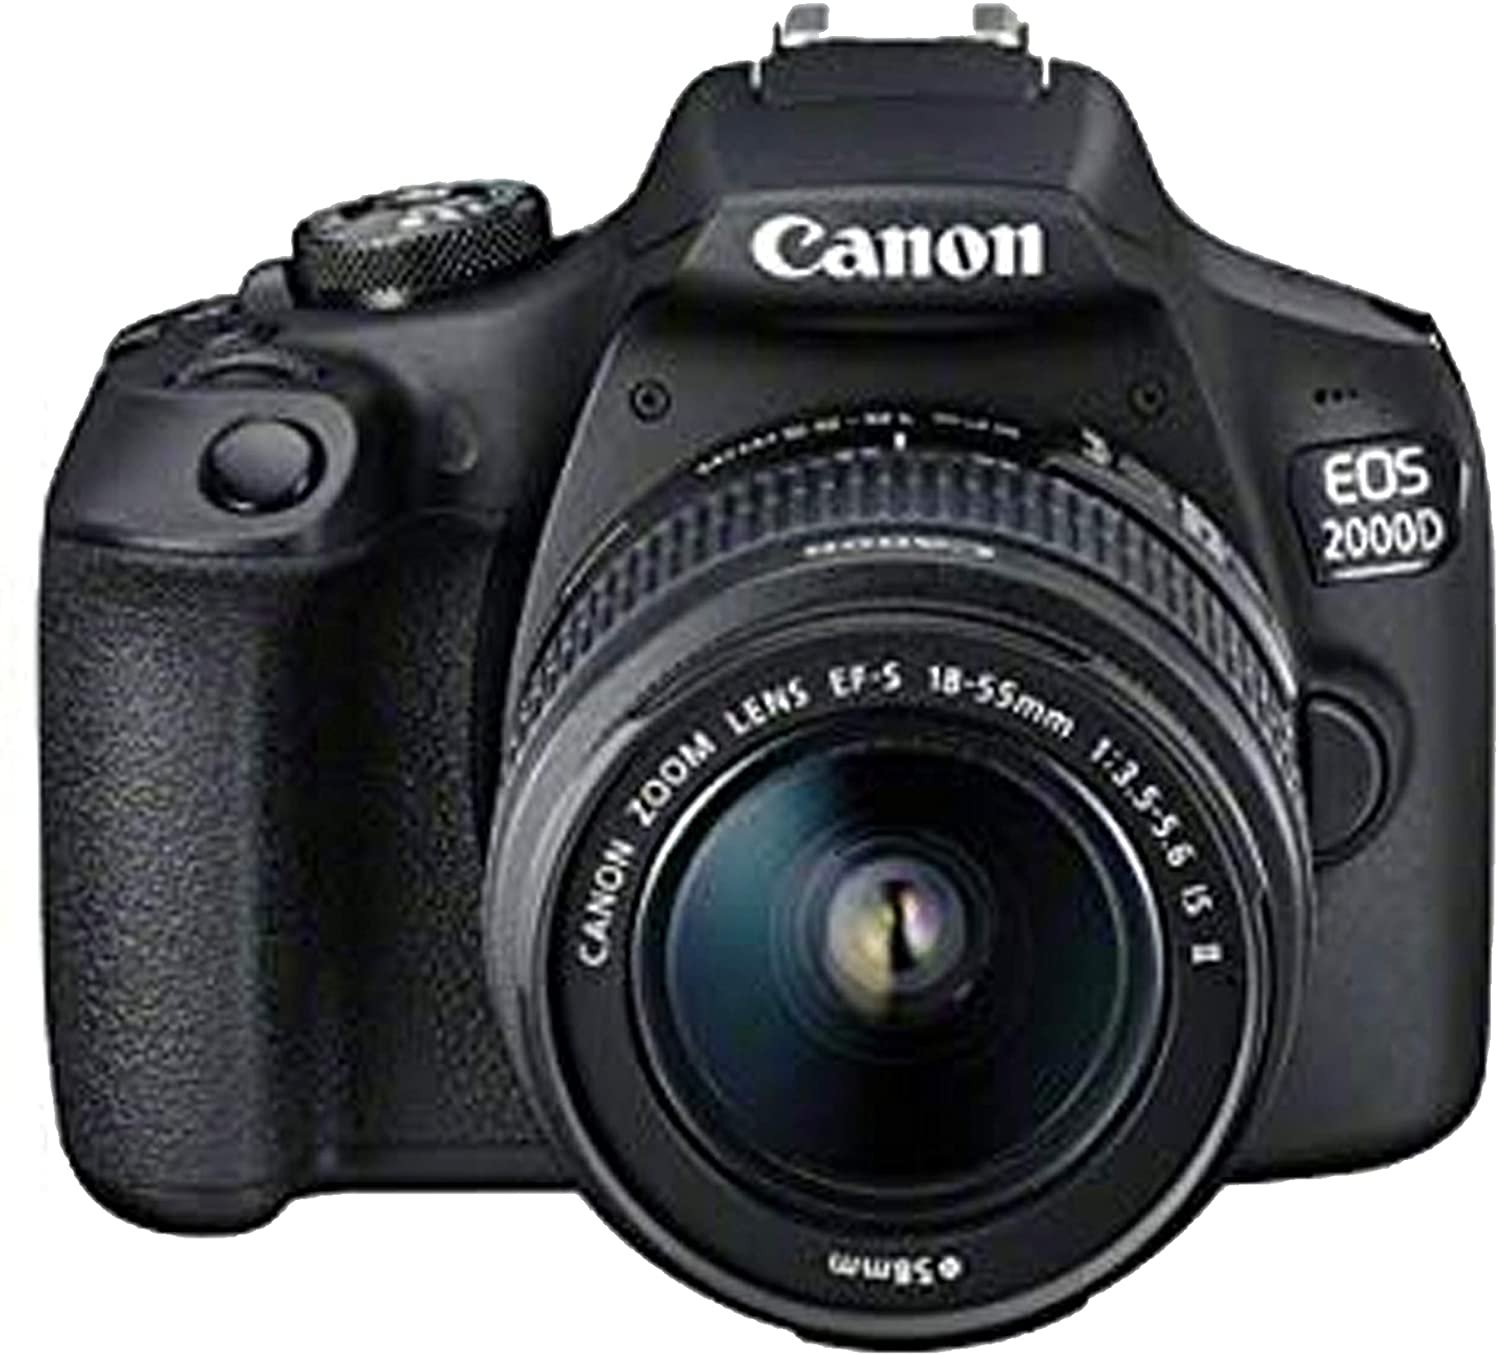 Canon EOS 2000D (Rebel T7) DSLR Camera with 18-55mm f/3.5-5.6 Zoom Lens, 64GB Memory,Case, Tripod and More (28pc Bundle) - image 2 of 8